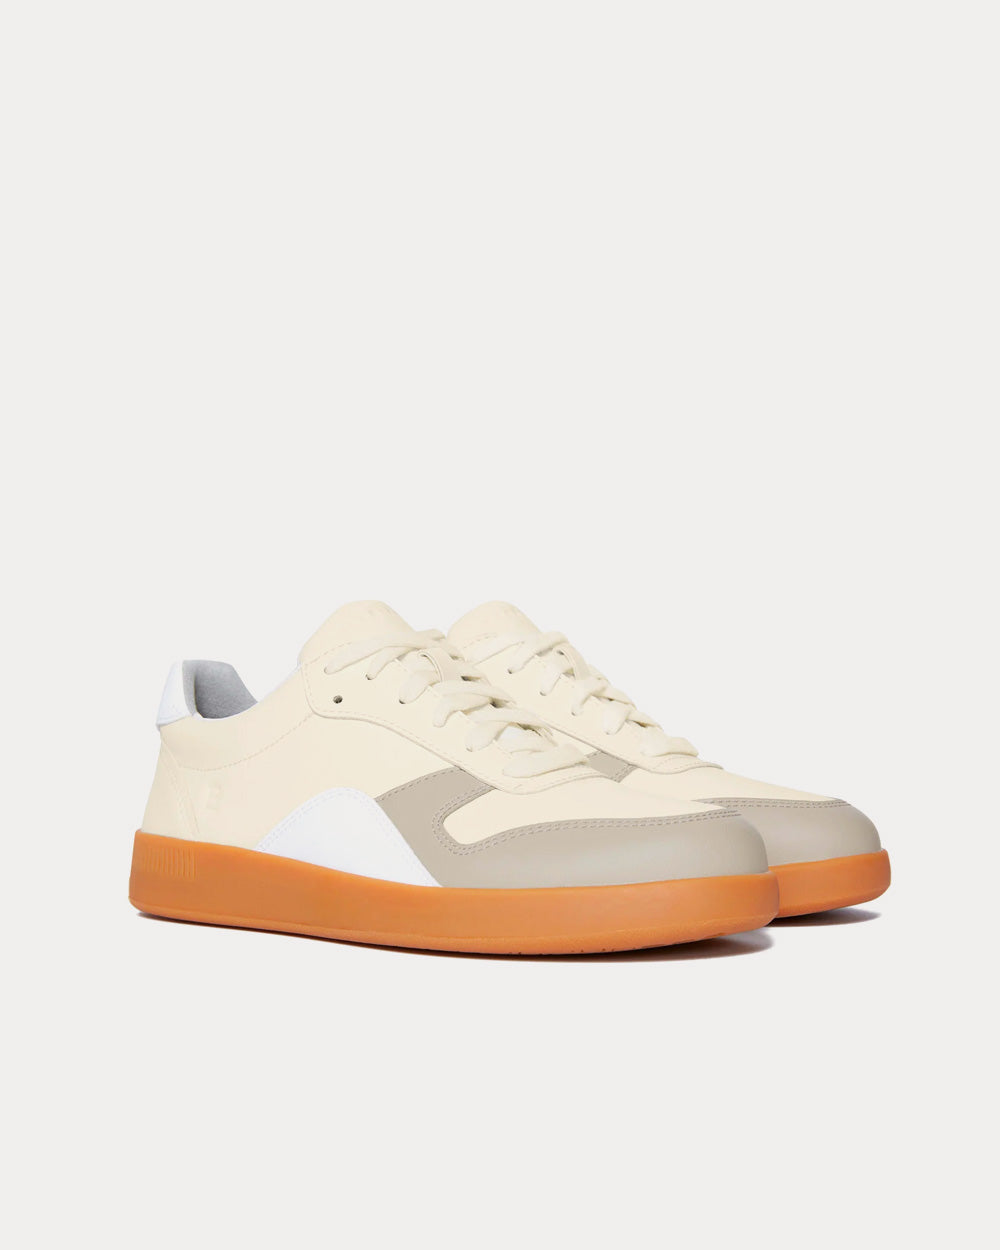 Everlane - The ReLeather Court Off-White / Light Grey Low Top Sneakers